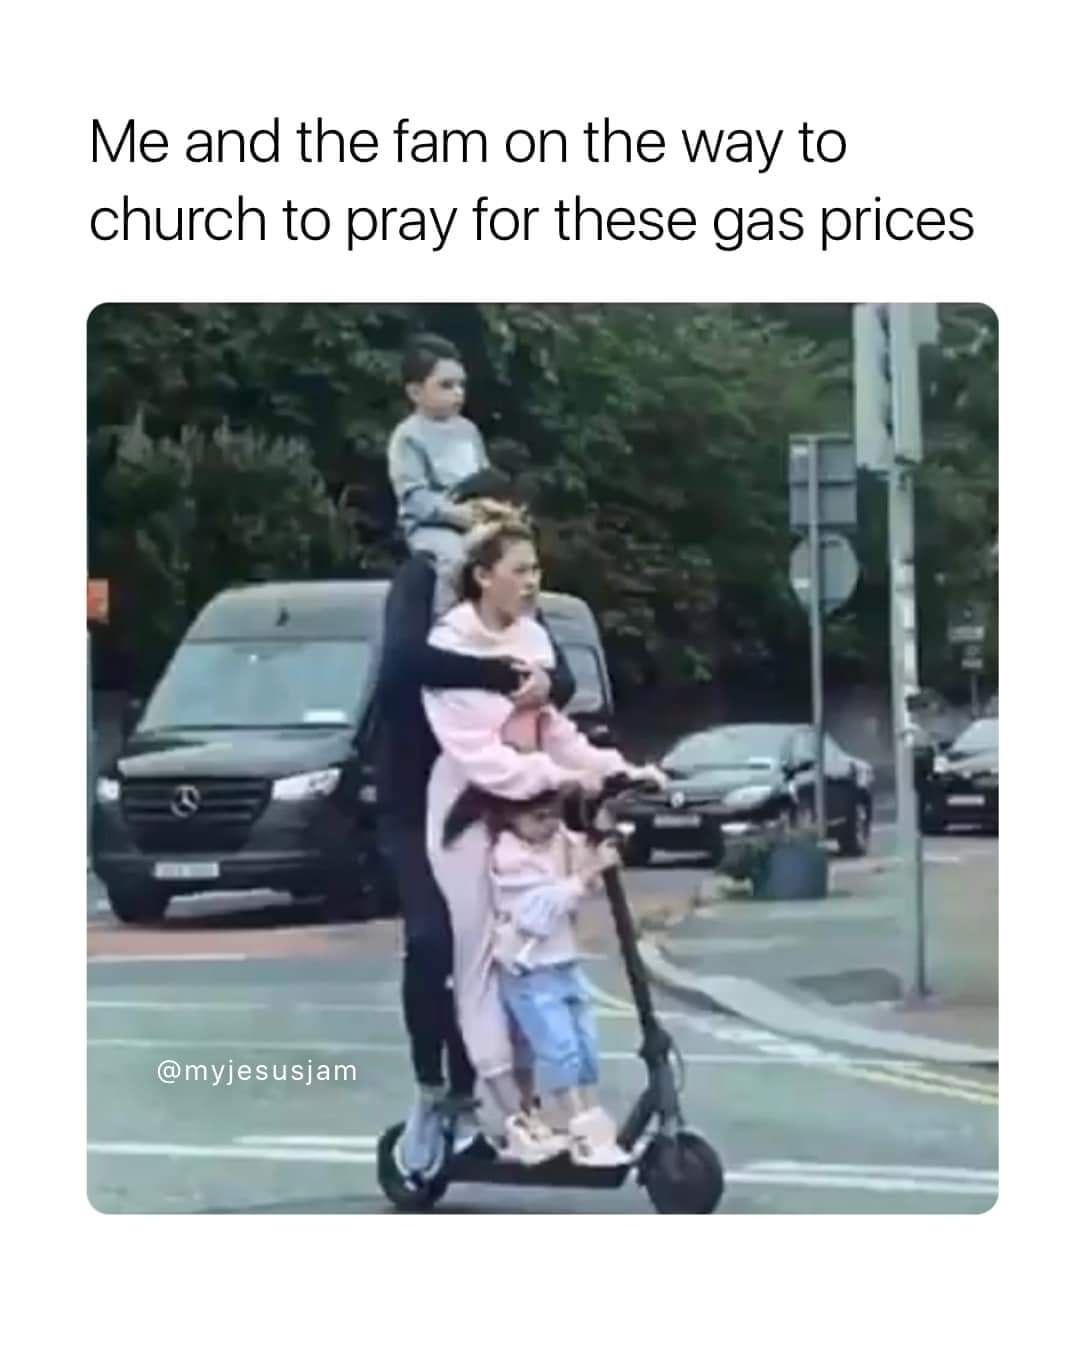 Me and the fam on the way to church to pray for these gas prices.